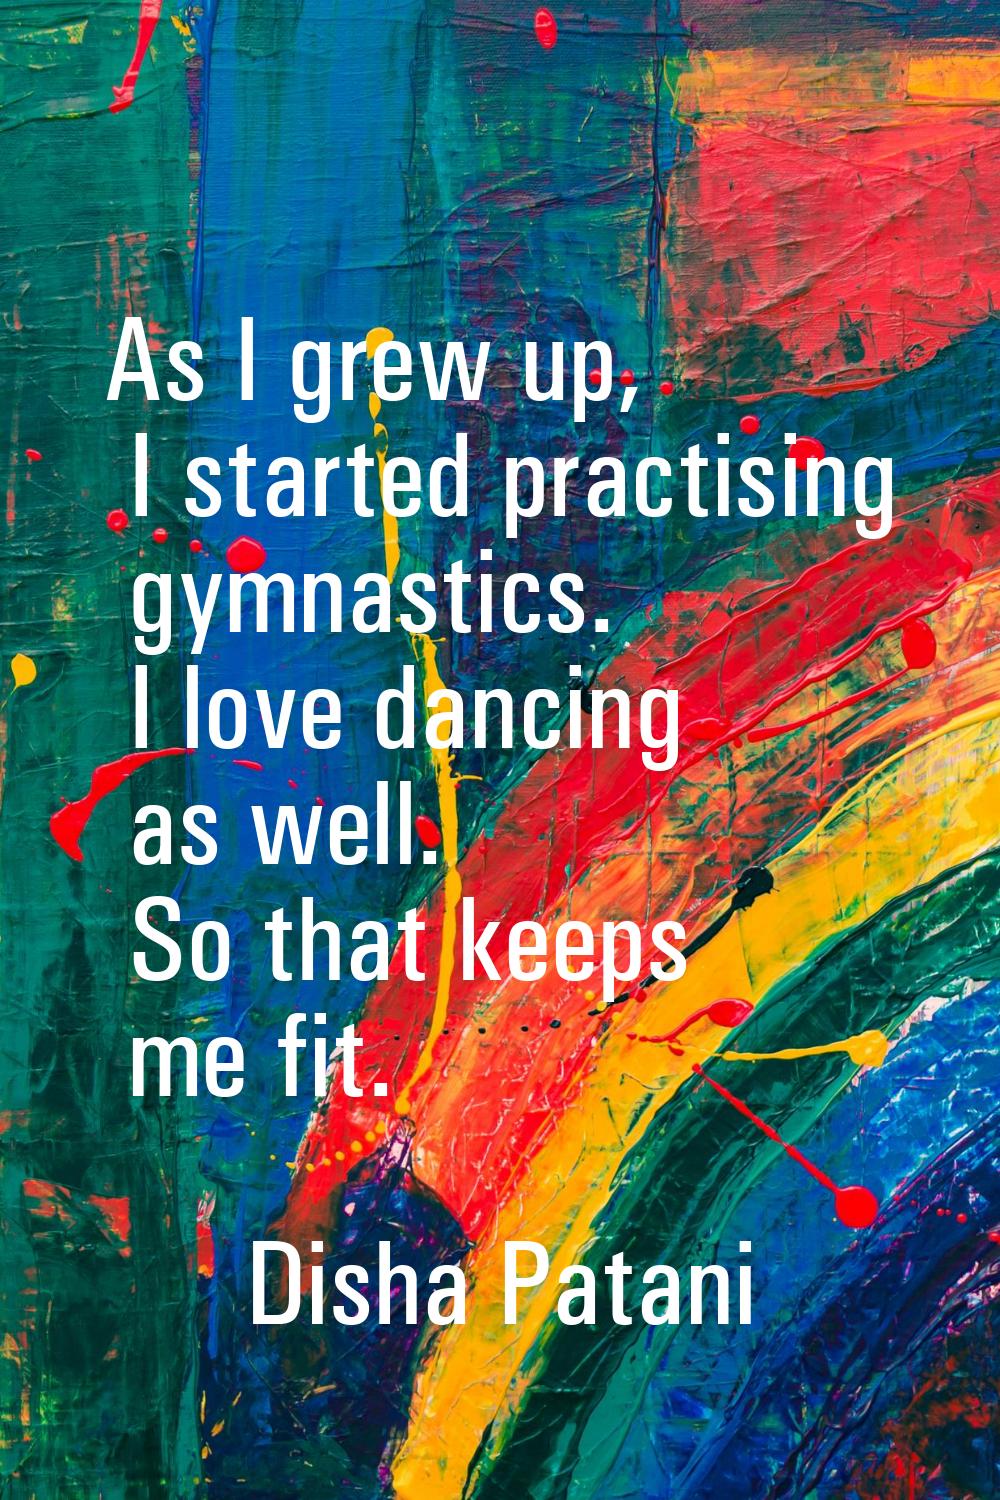 As I grew up, I started practising gymnastics. I love dancing as well. So that keeps me fit.